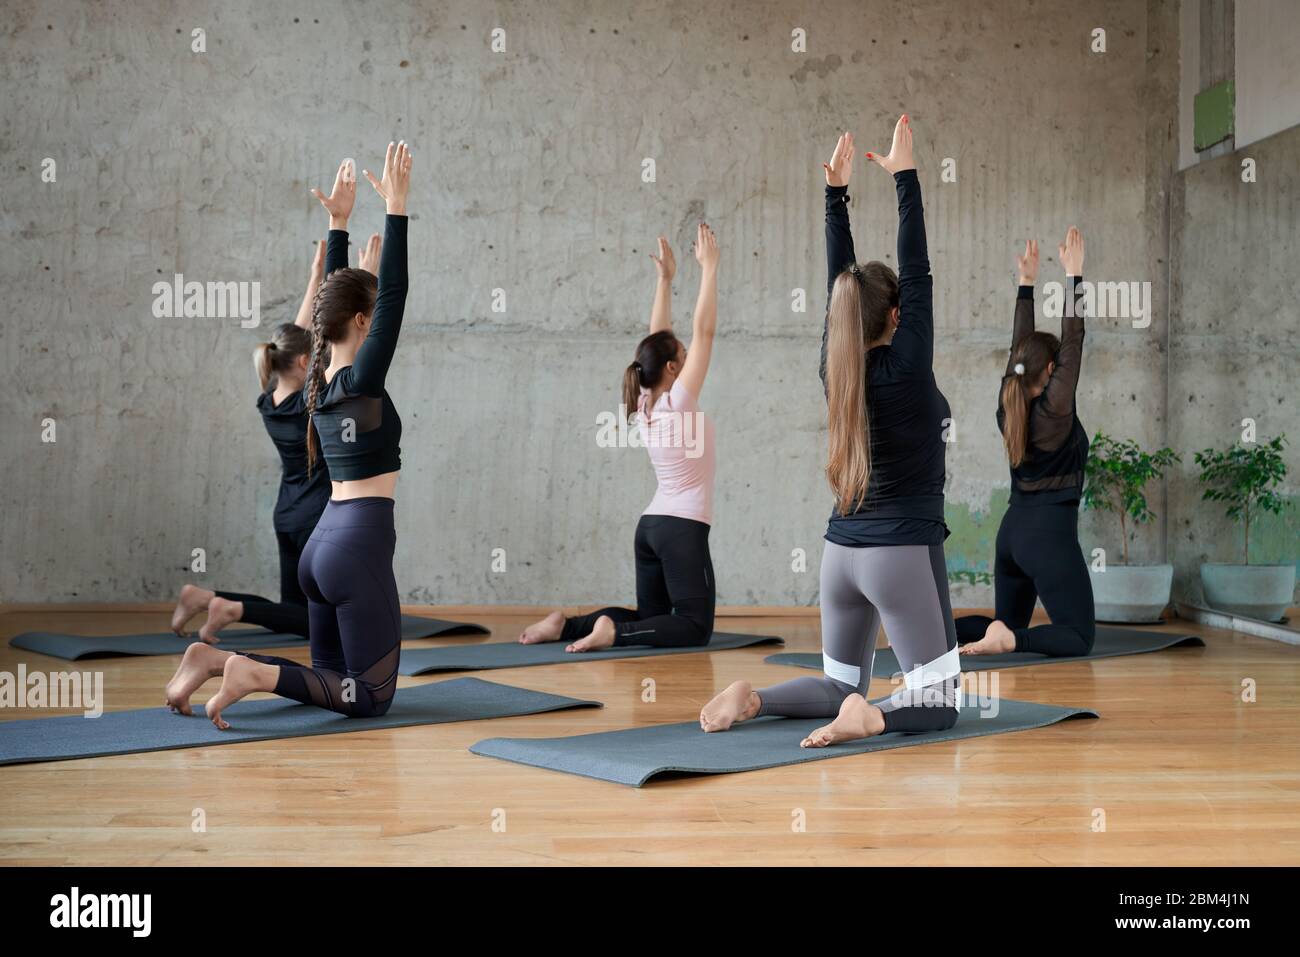 Back view of young fitnesswomen in sportswear practicing yoga pose, standing on knees with hands up, practicing in studio, loft interior. Concept of healthy lifestyle, yoga. Stock Photo